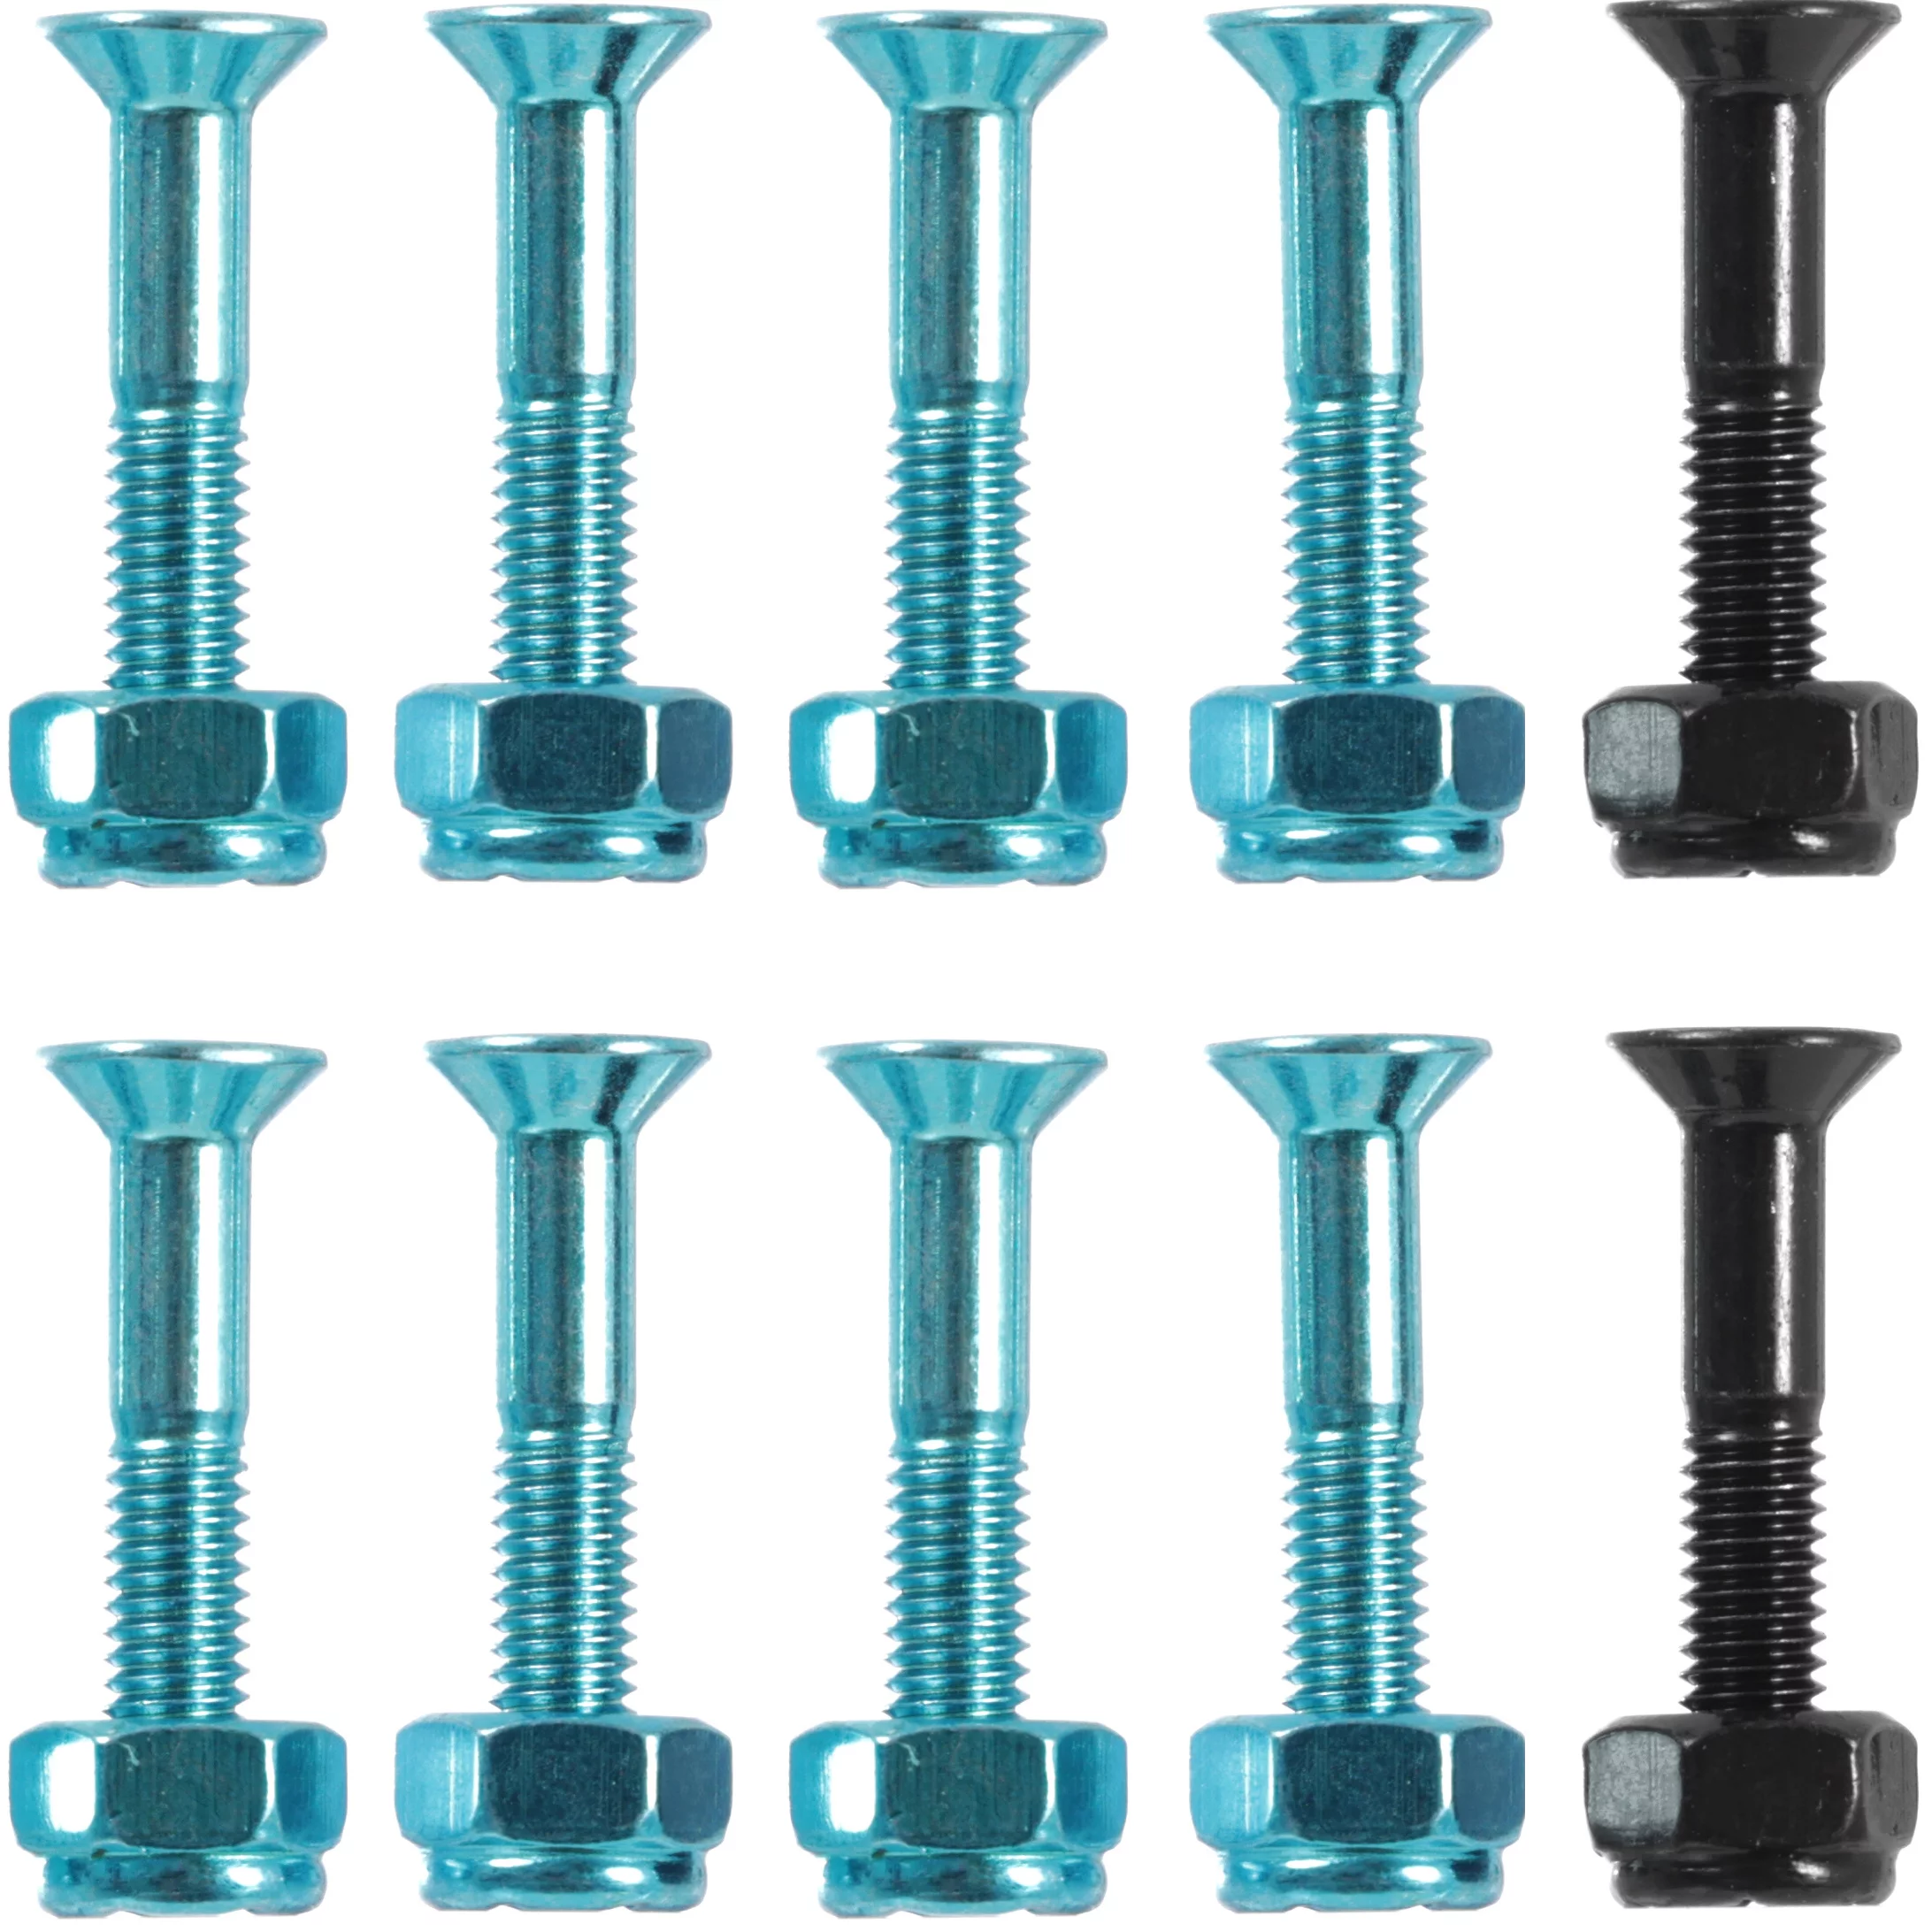 Snowboard Binding Screw Set Include 4 Pieces Snowboard Mounting Screws and 4 Pieces Snowboarding Screw Washers, Blue